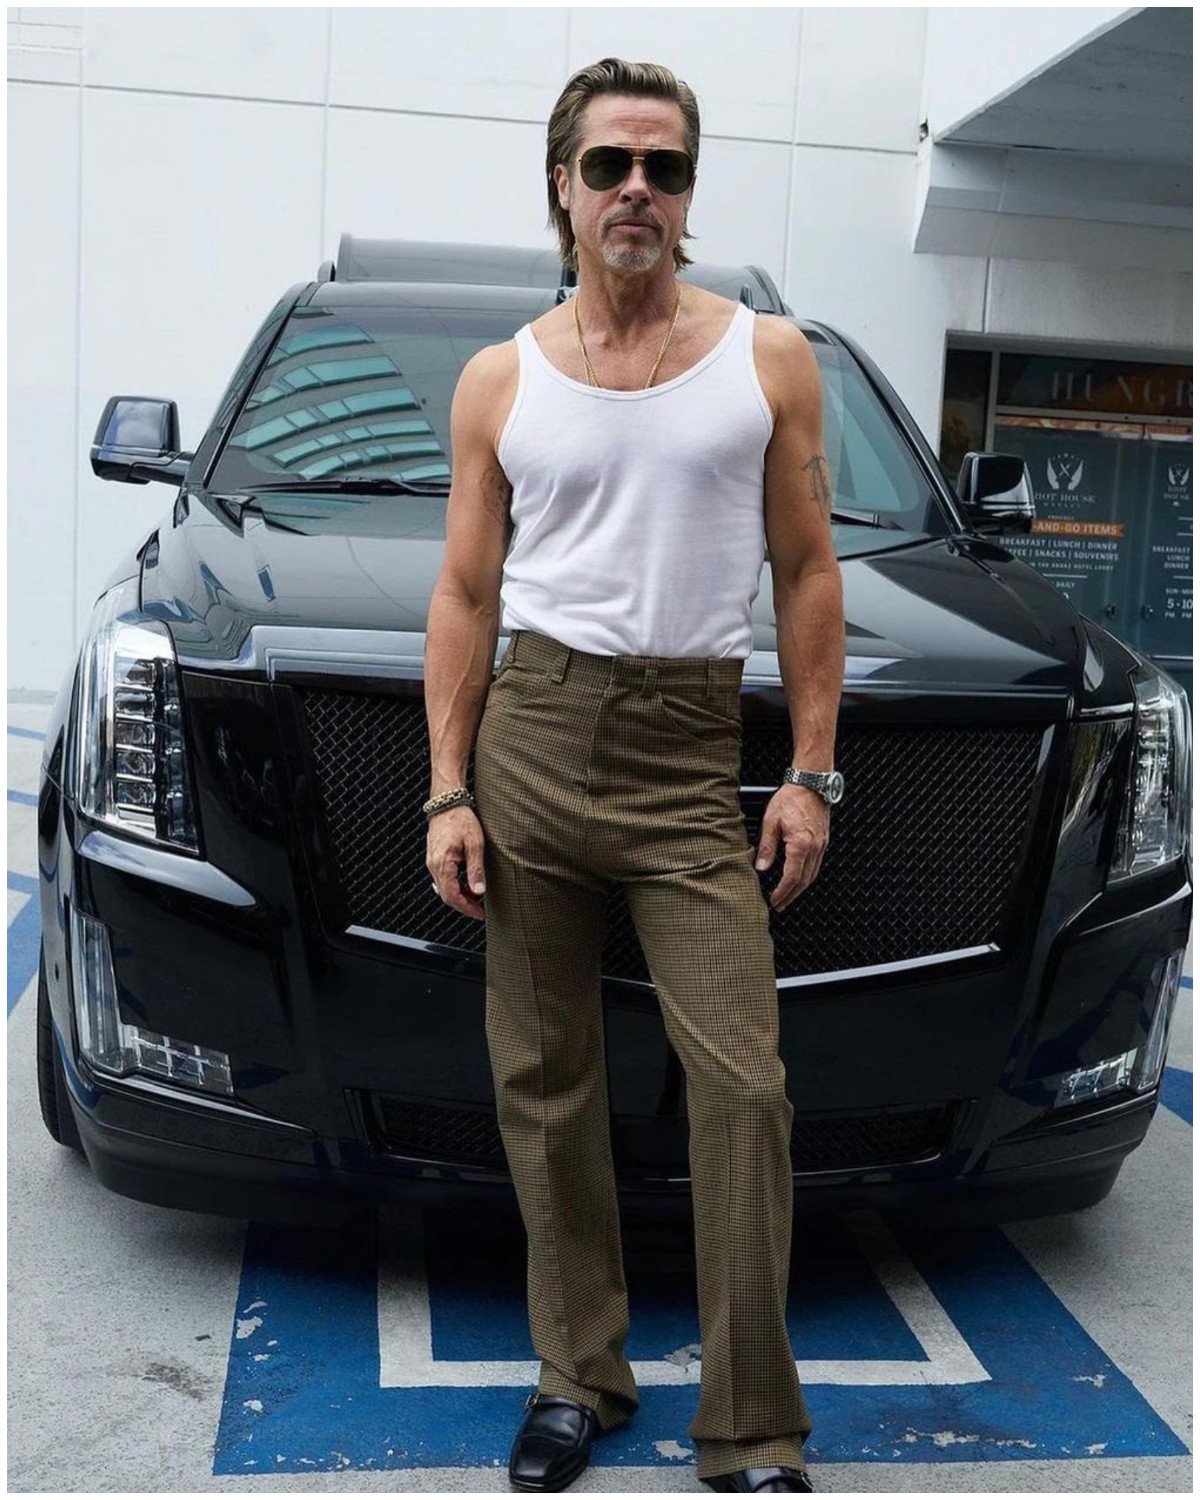 How does Brad Pitt spend his gigantic fortune? The Bullet Train star has a net worth of US$300 million, which he splashes on vineyards, luxury cars, homes – and some expensive bling for his ex-wives Angelina Jolie and Jennifer Aniston. Photo: @bradpittofflcial/Instagram